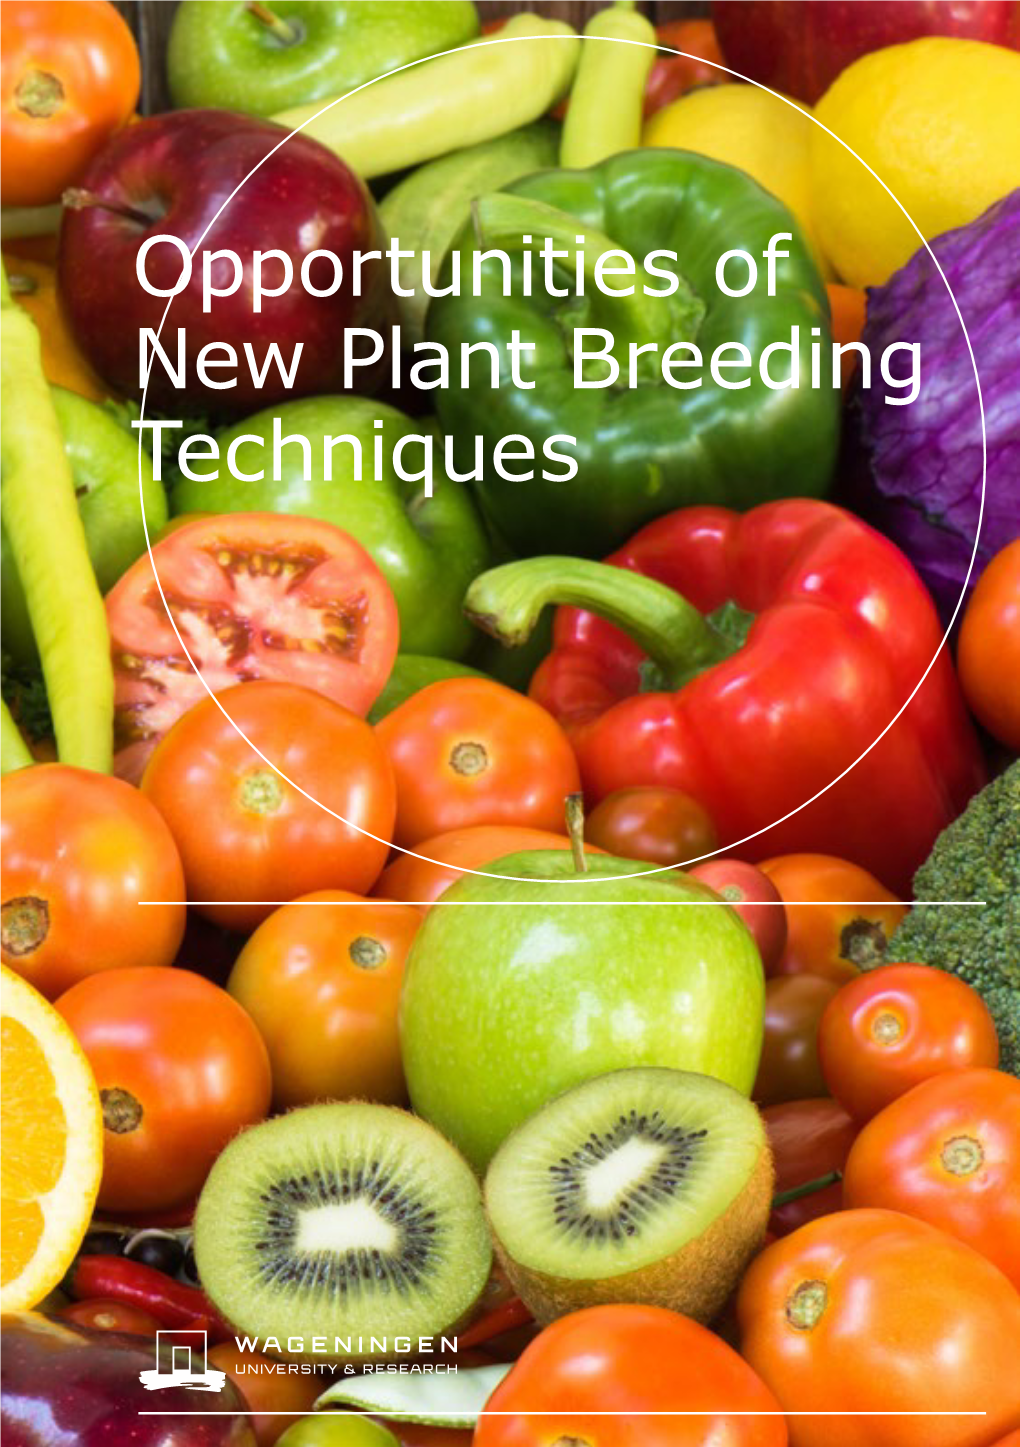 Opportunities of New Plant Breeding Techniques